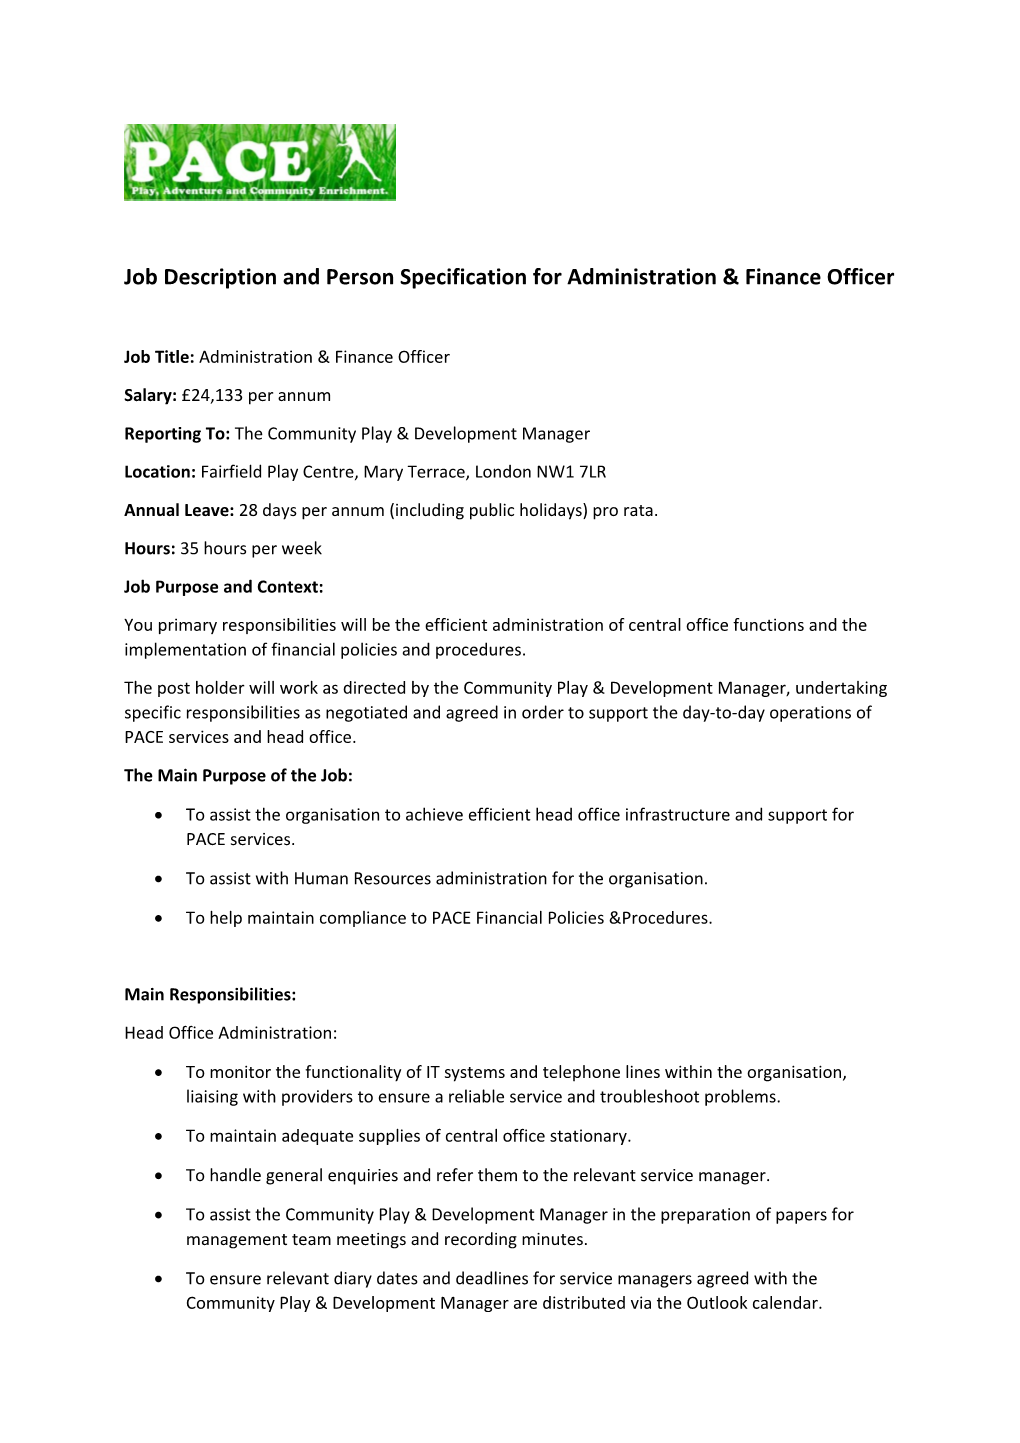 Job Description and Person Specification for Administration& Finance Officer